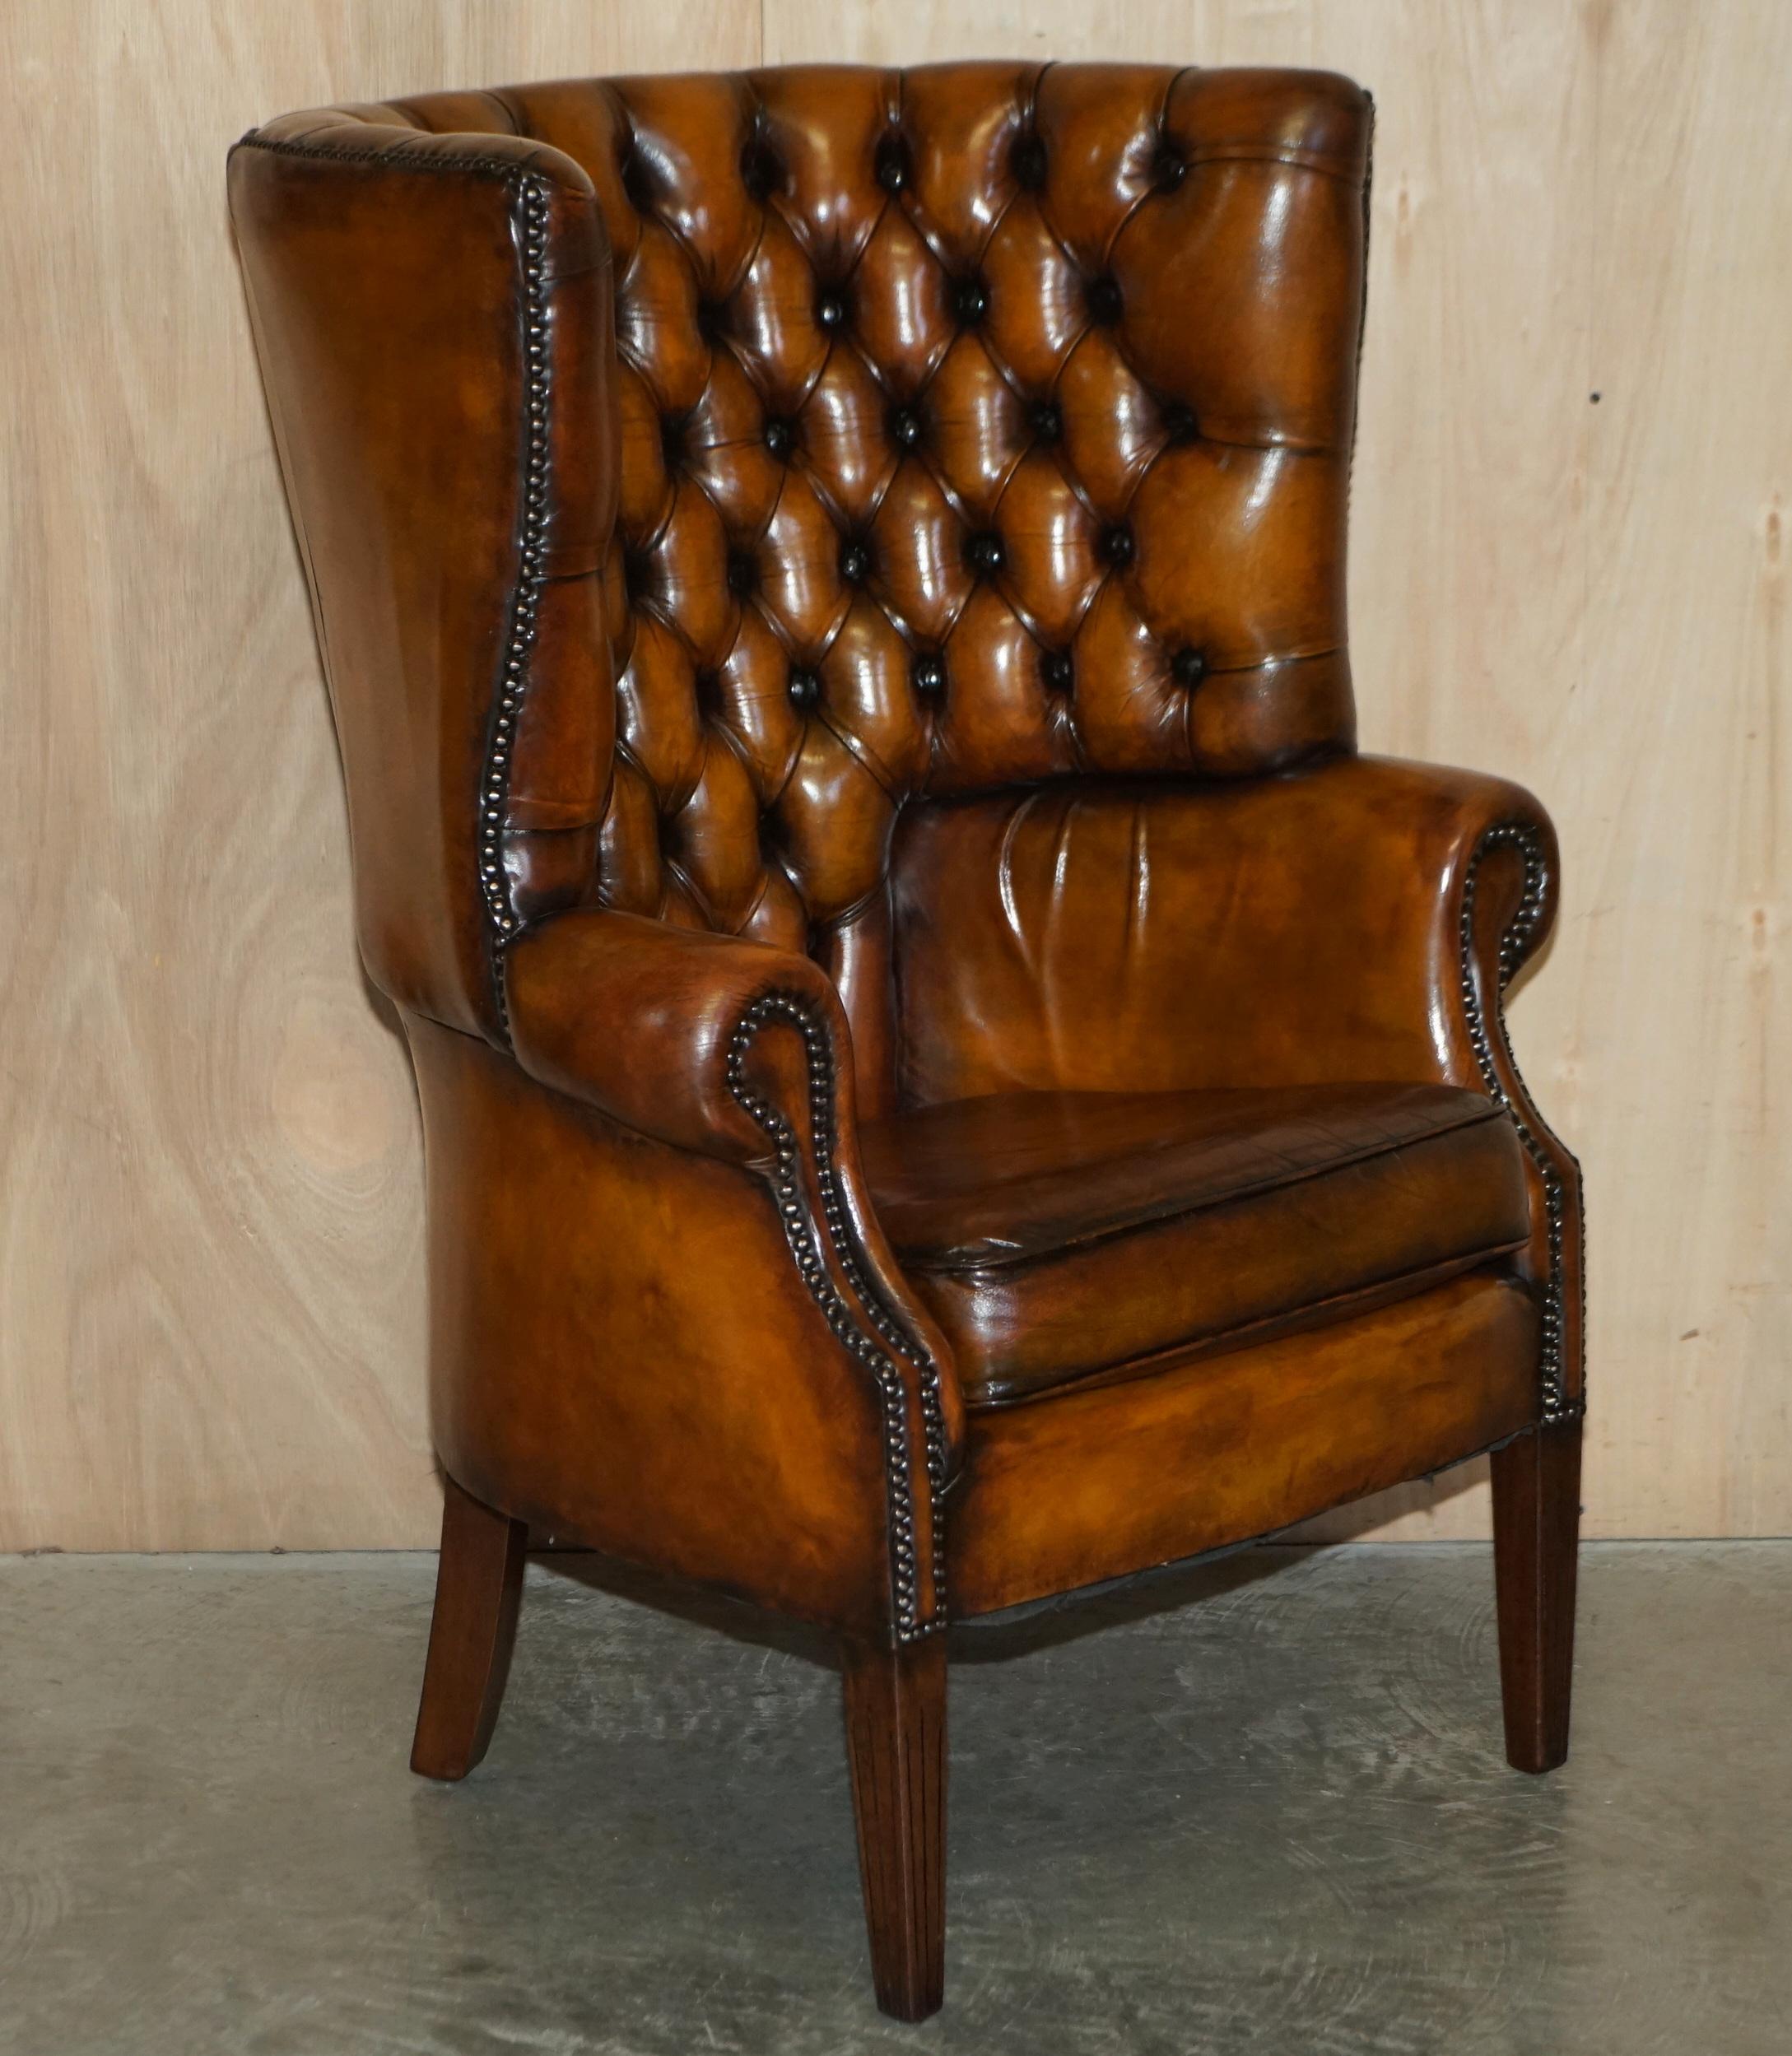 We are delighted to offer for sale this pair of stunning late Victorian Porters barrel back armchairs in whisky brown leather.

These chairs are a real tour de force, they have absolutely everything going for them, the leather hide is original and